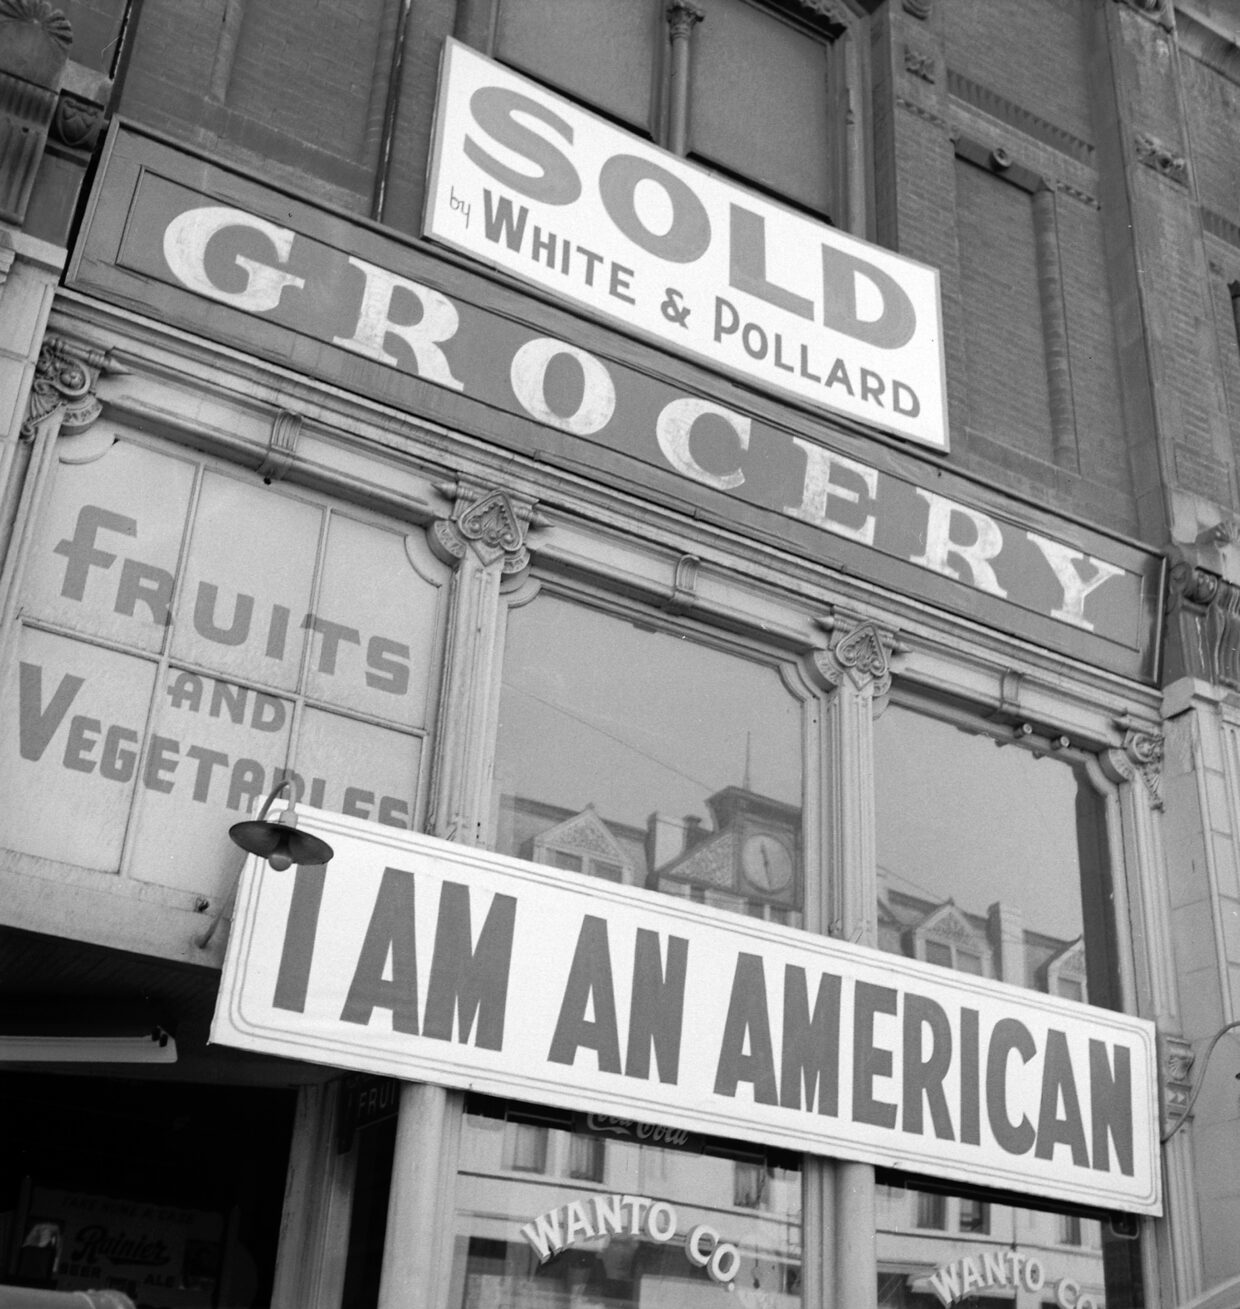 Japanese American Grocery Proclaims “I Am An American“ as they Sell The Store Prior to Internment